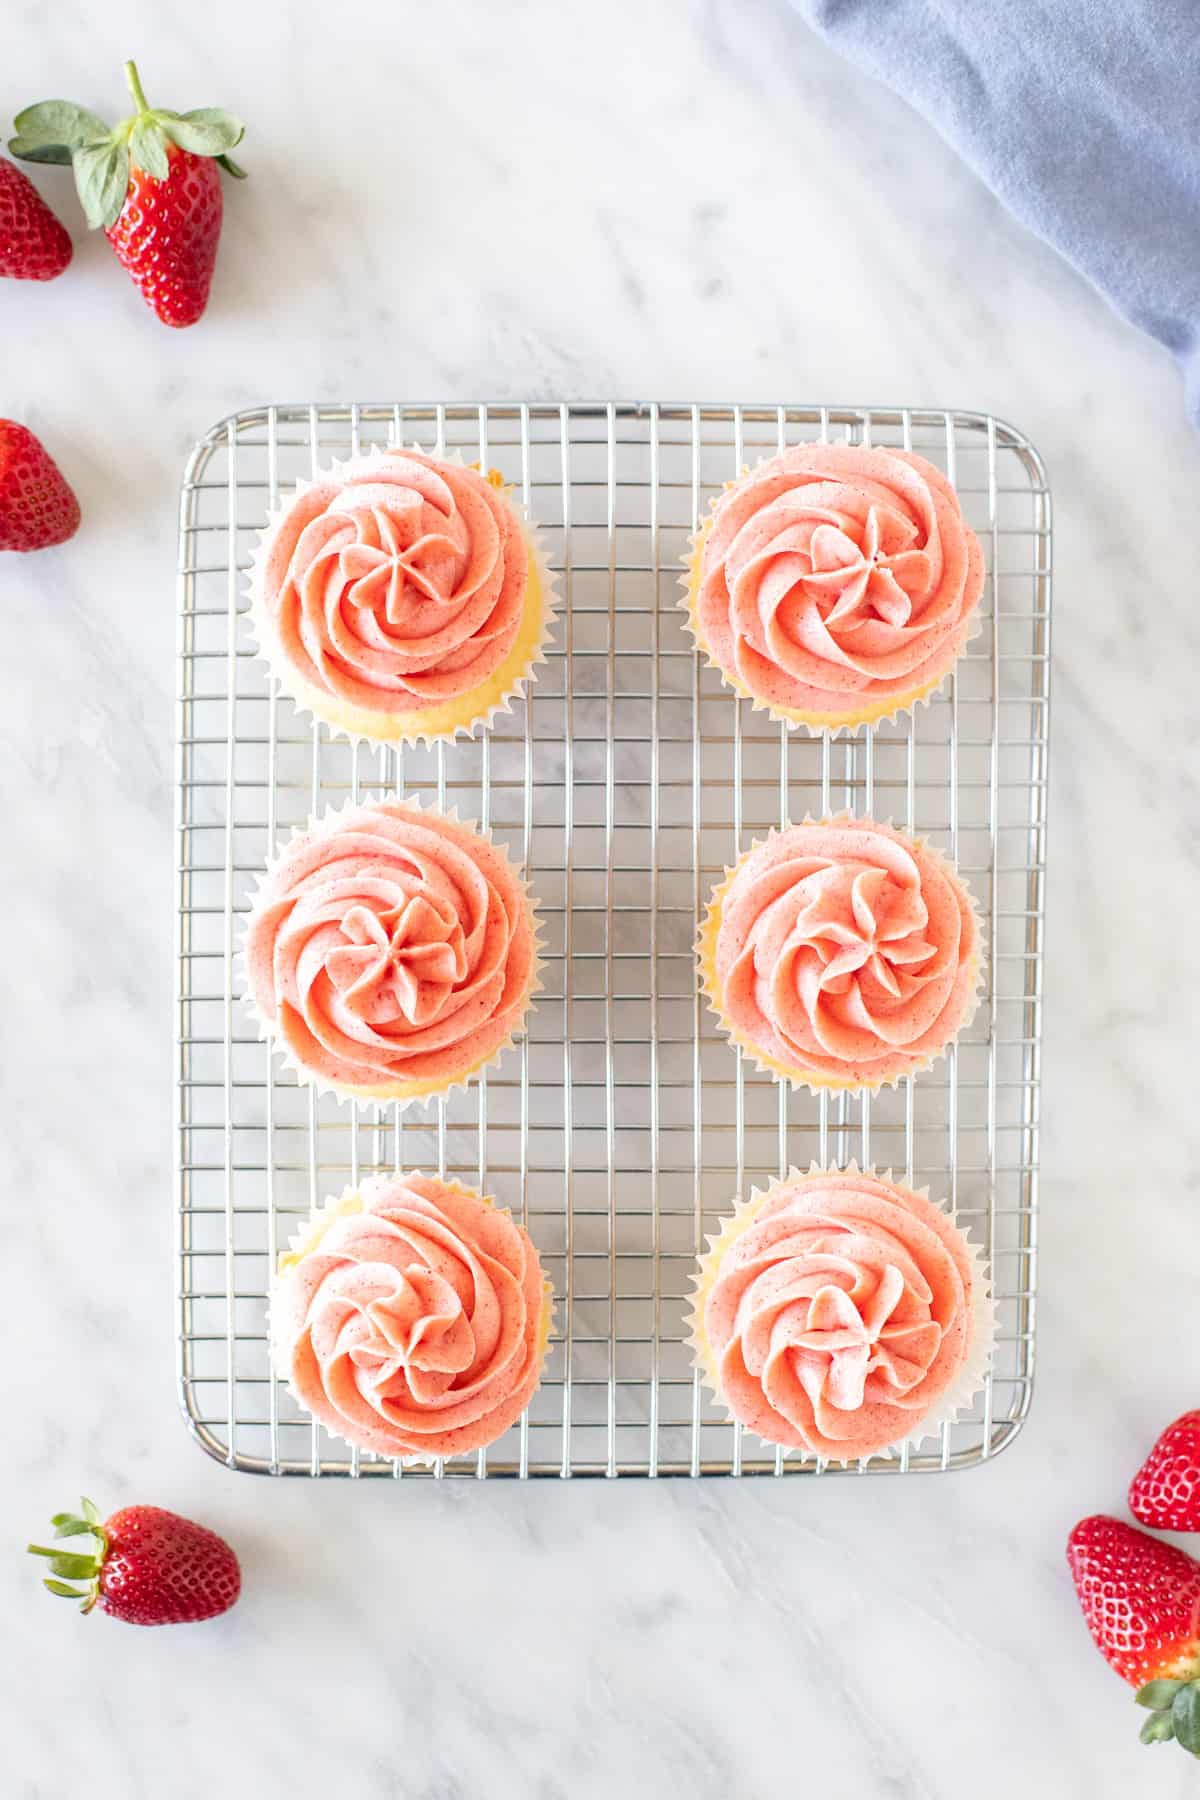 6 cupcakes with pink frosting on a wire cooling rack rack